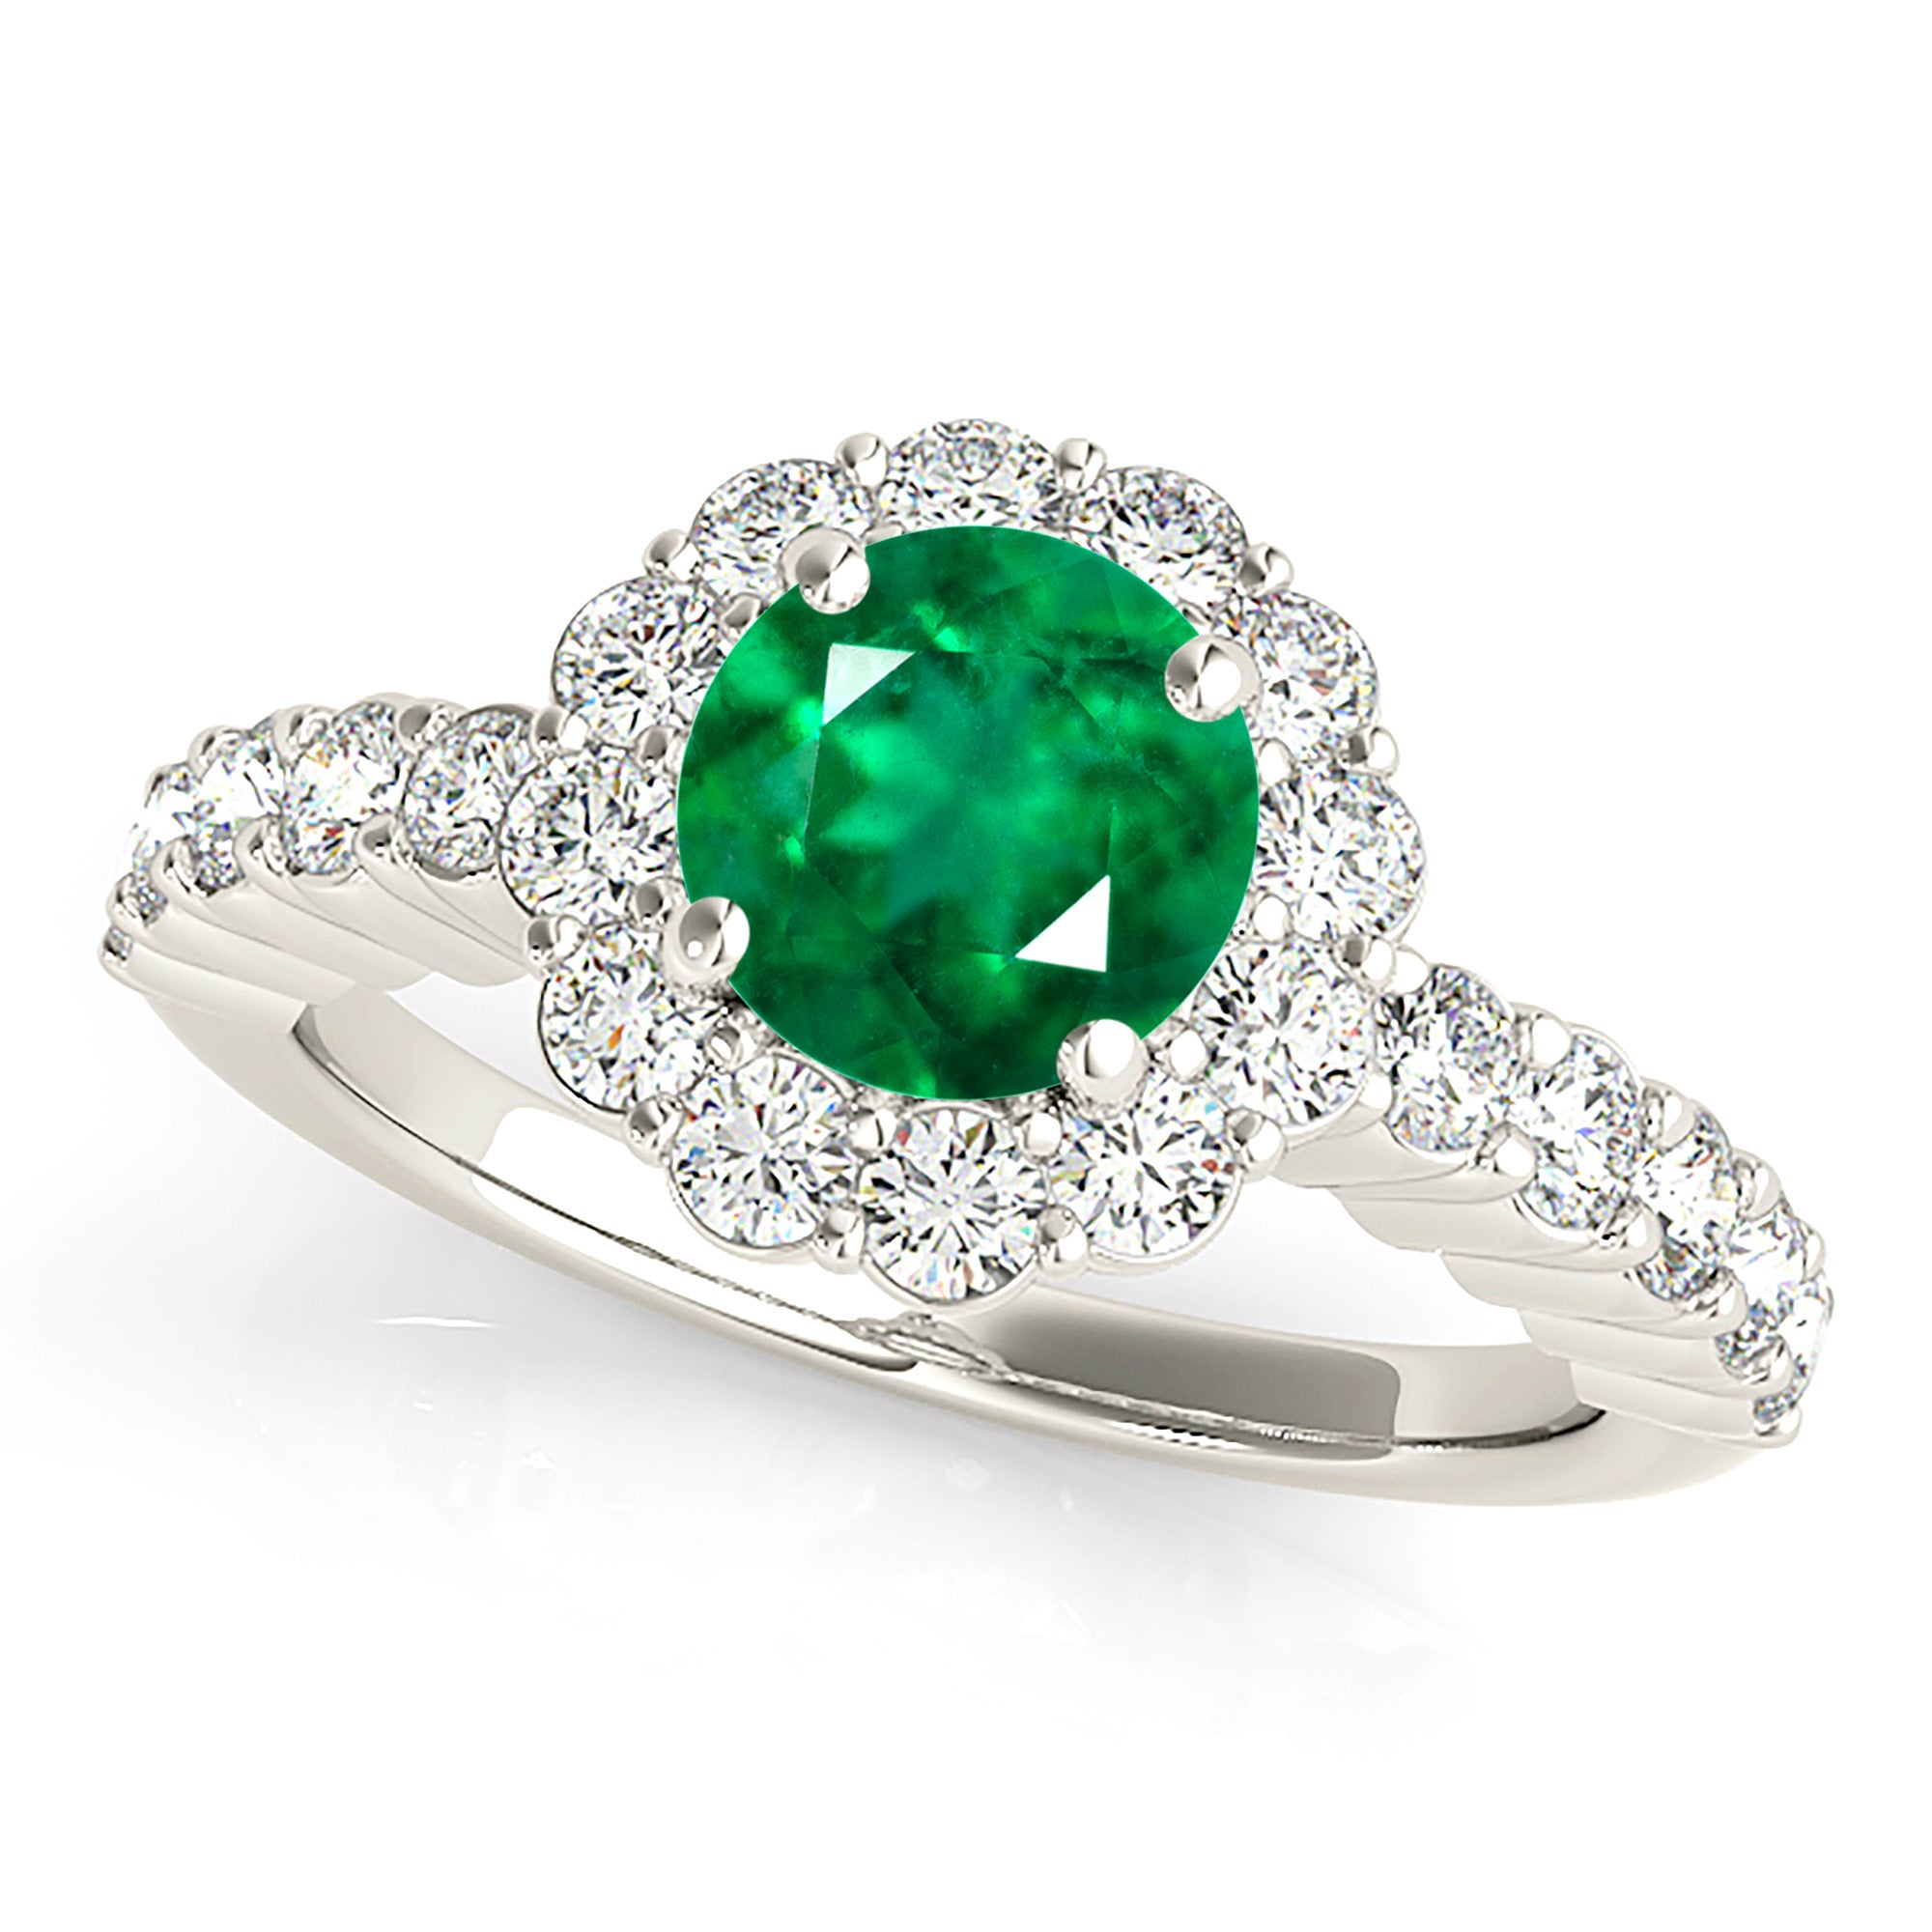 1.14 ct. Genuine Emerald Ring With 0.70 ctw. Diamond Halo And Scalloped Diamond Band-in 14K/18K White, Yellow, Rose Gold and Platinum - Christmas Jewelry Gift -VIRABYANI